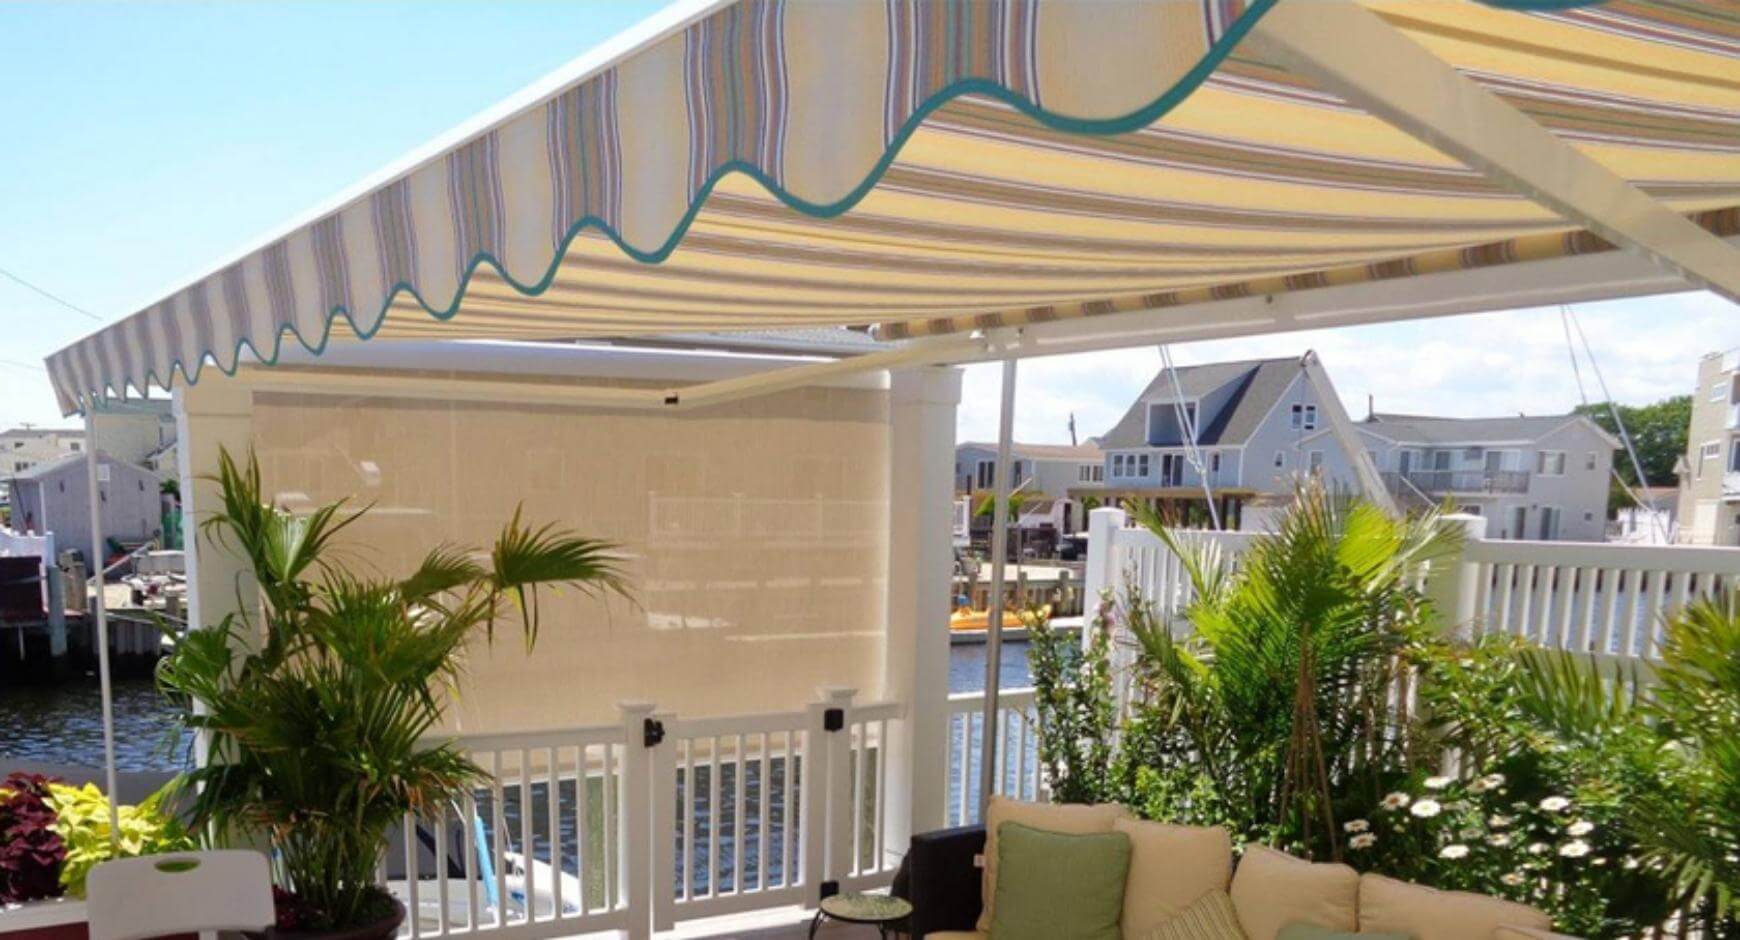 awning and privacy screen covering patio